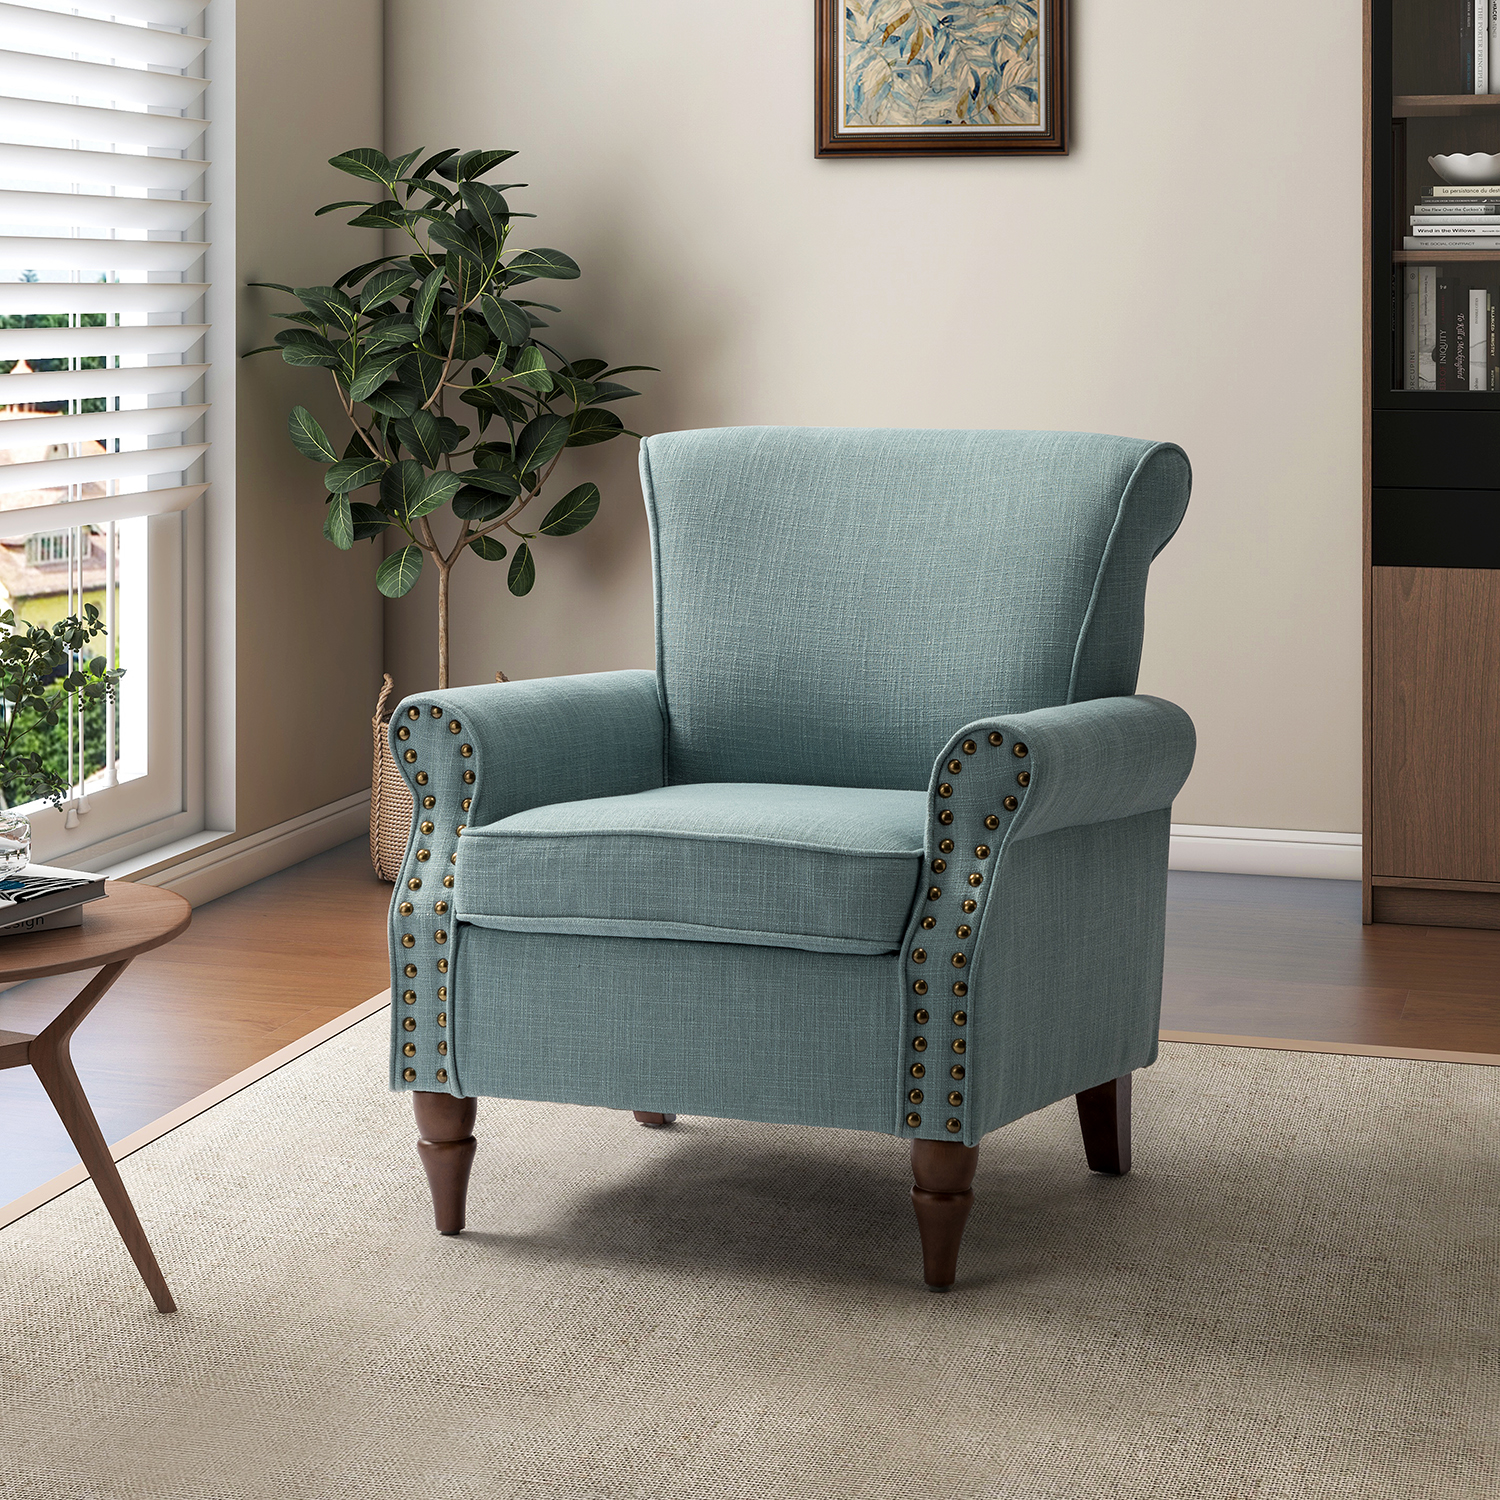 Pelagon Armchair with Turned Legs and Nailhead Trim